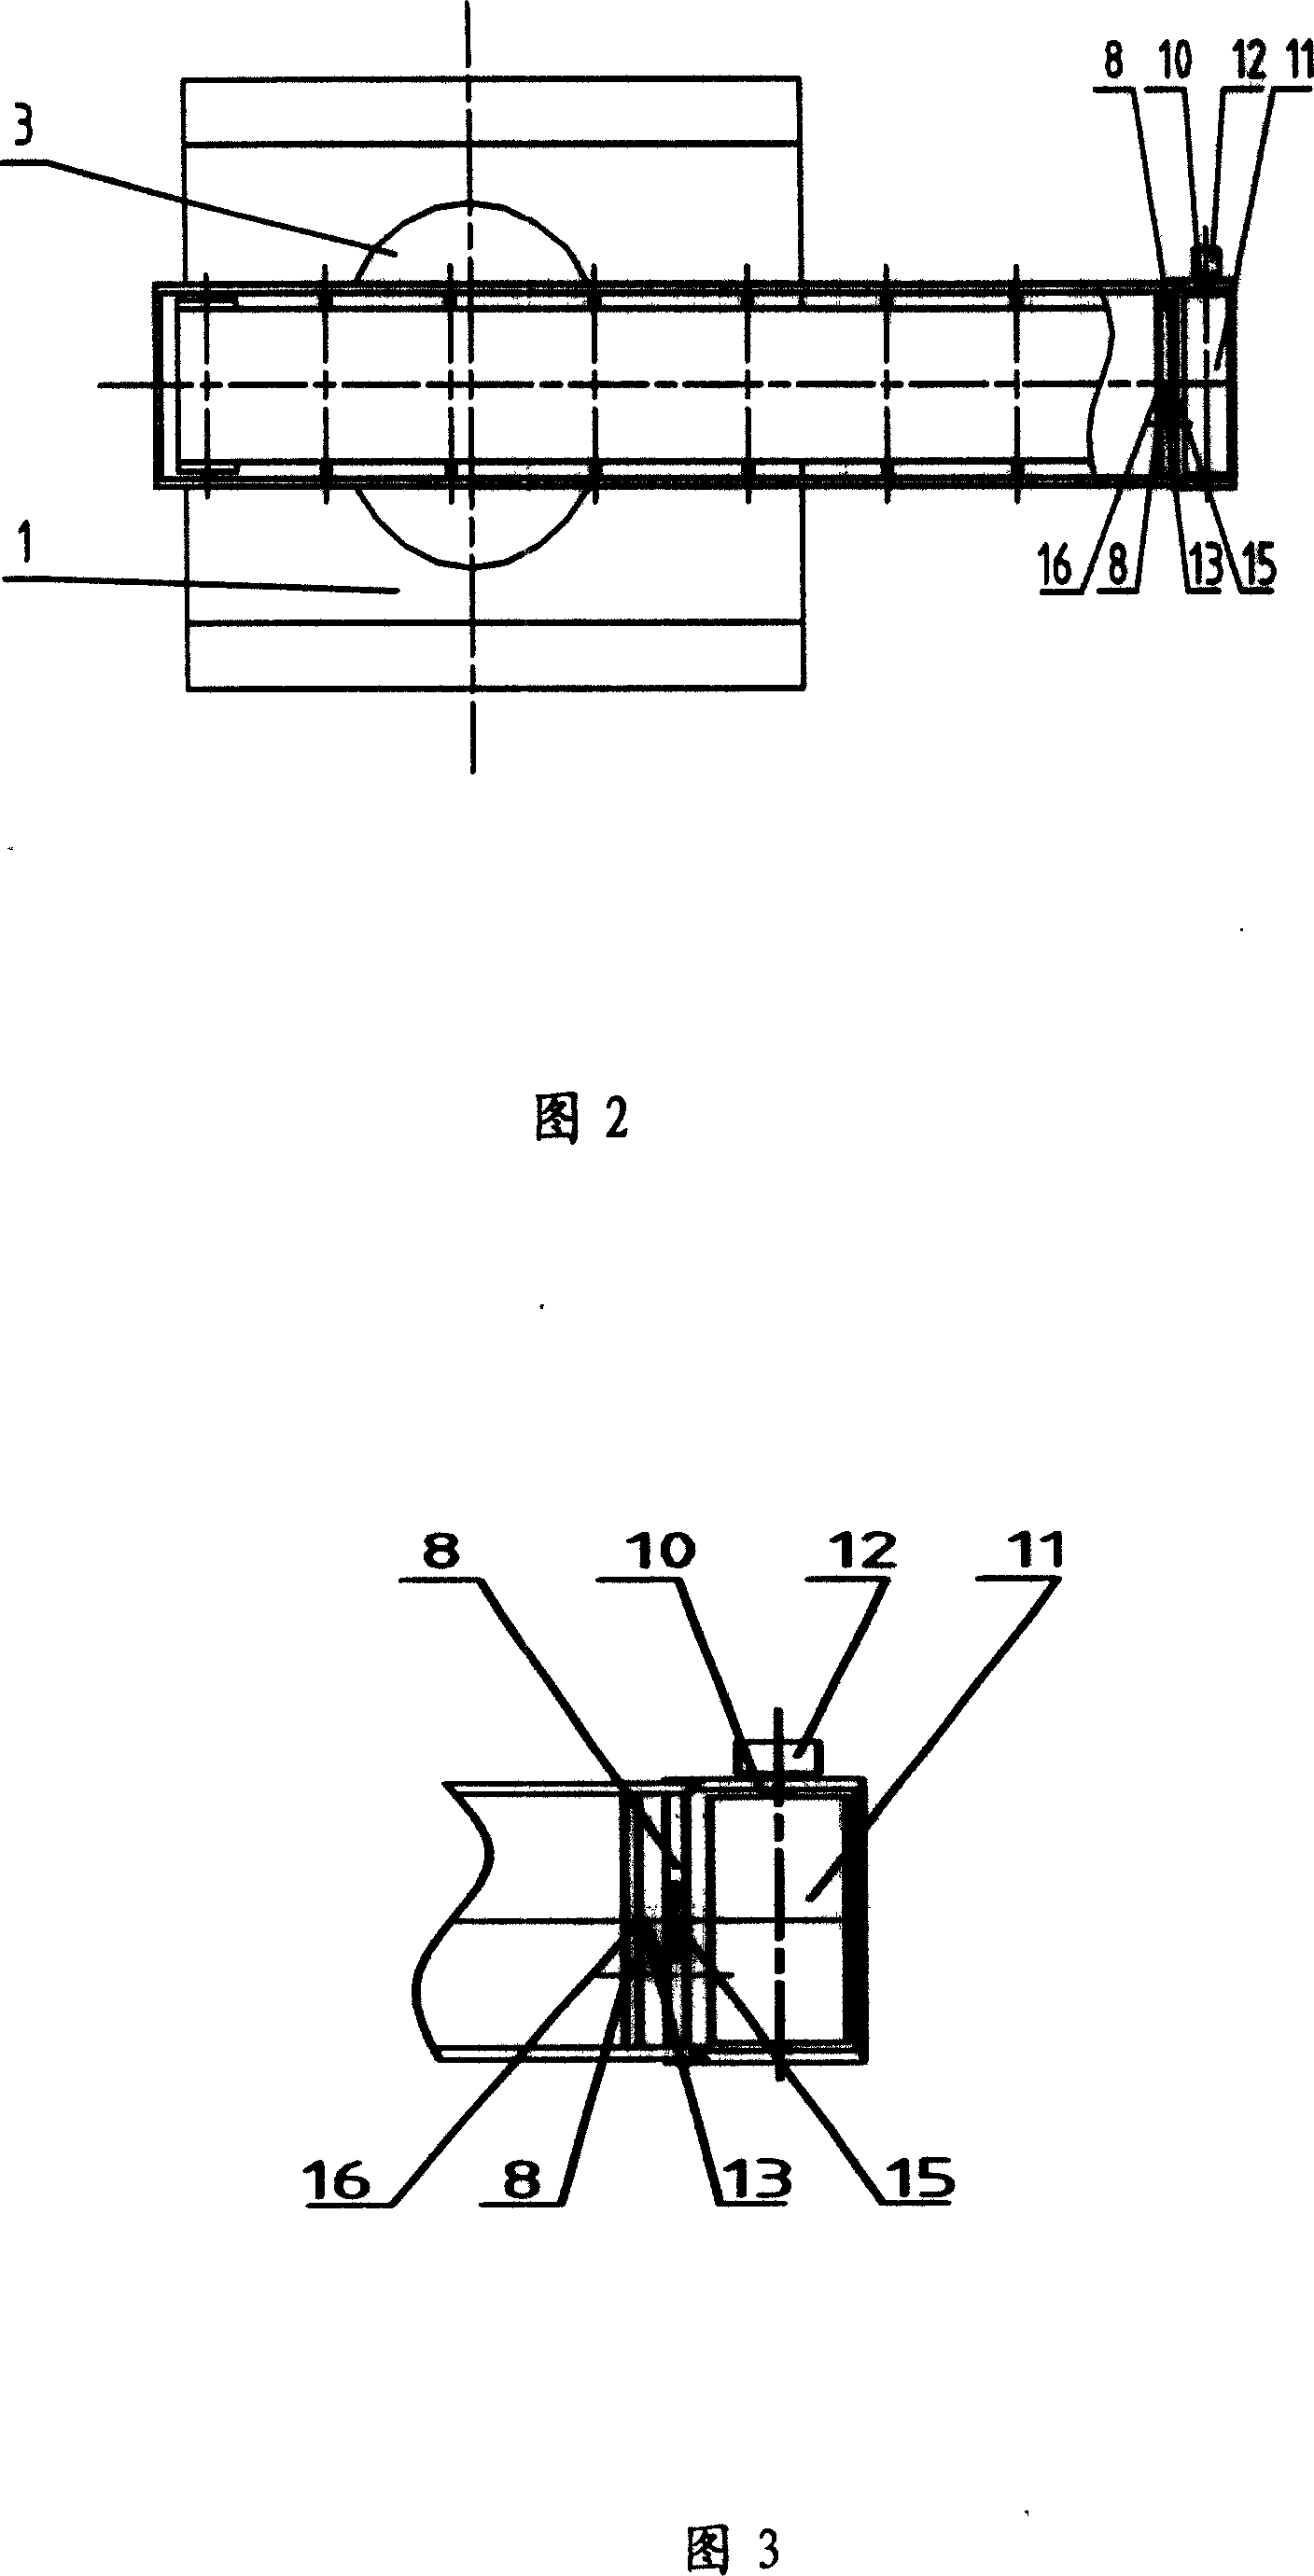 Materials casting device